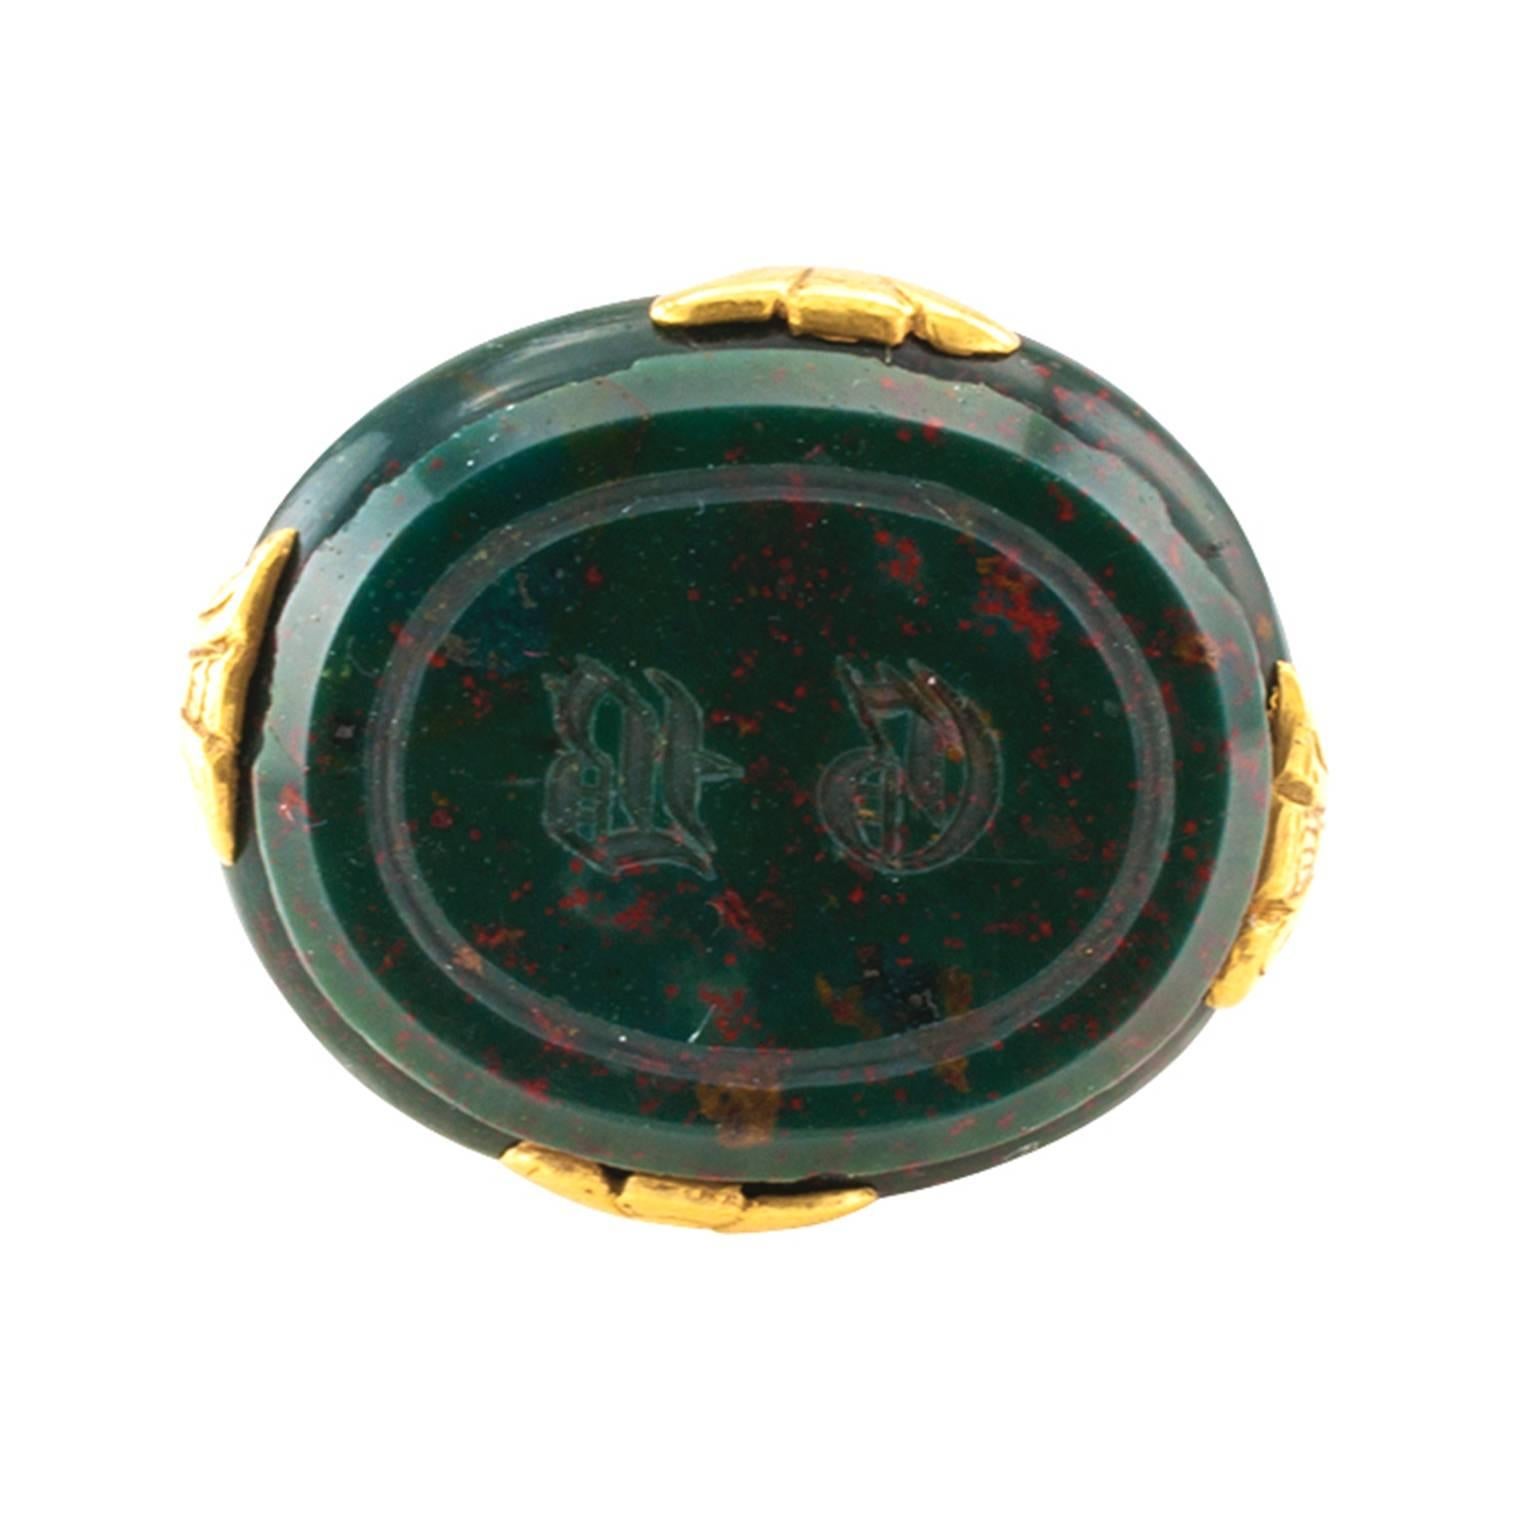 French Victorian Gold and Bloodstone Fob

For sure very nice by itself or as a very fine piece to add to an already existing collection.  This fob is a marvel of design and structure.  Set with a very fine bloodstone, mounted in 18 karat yellow